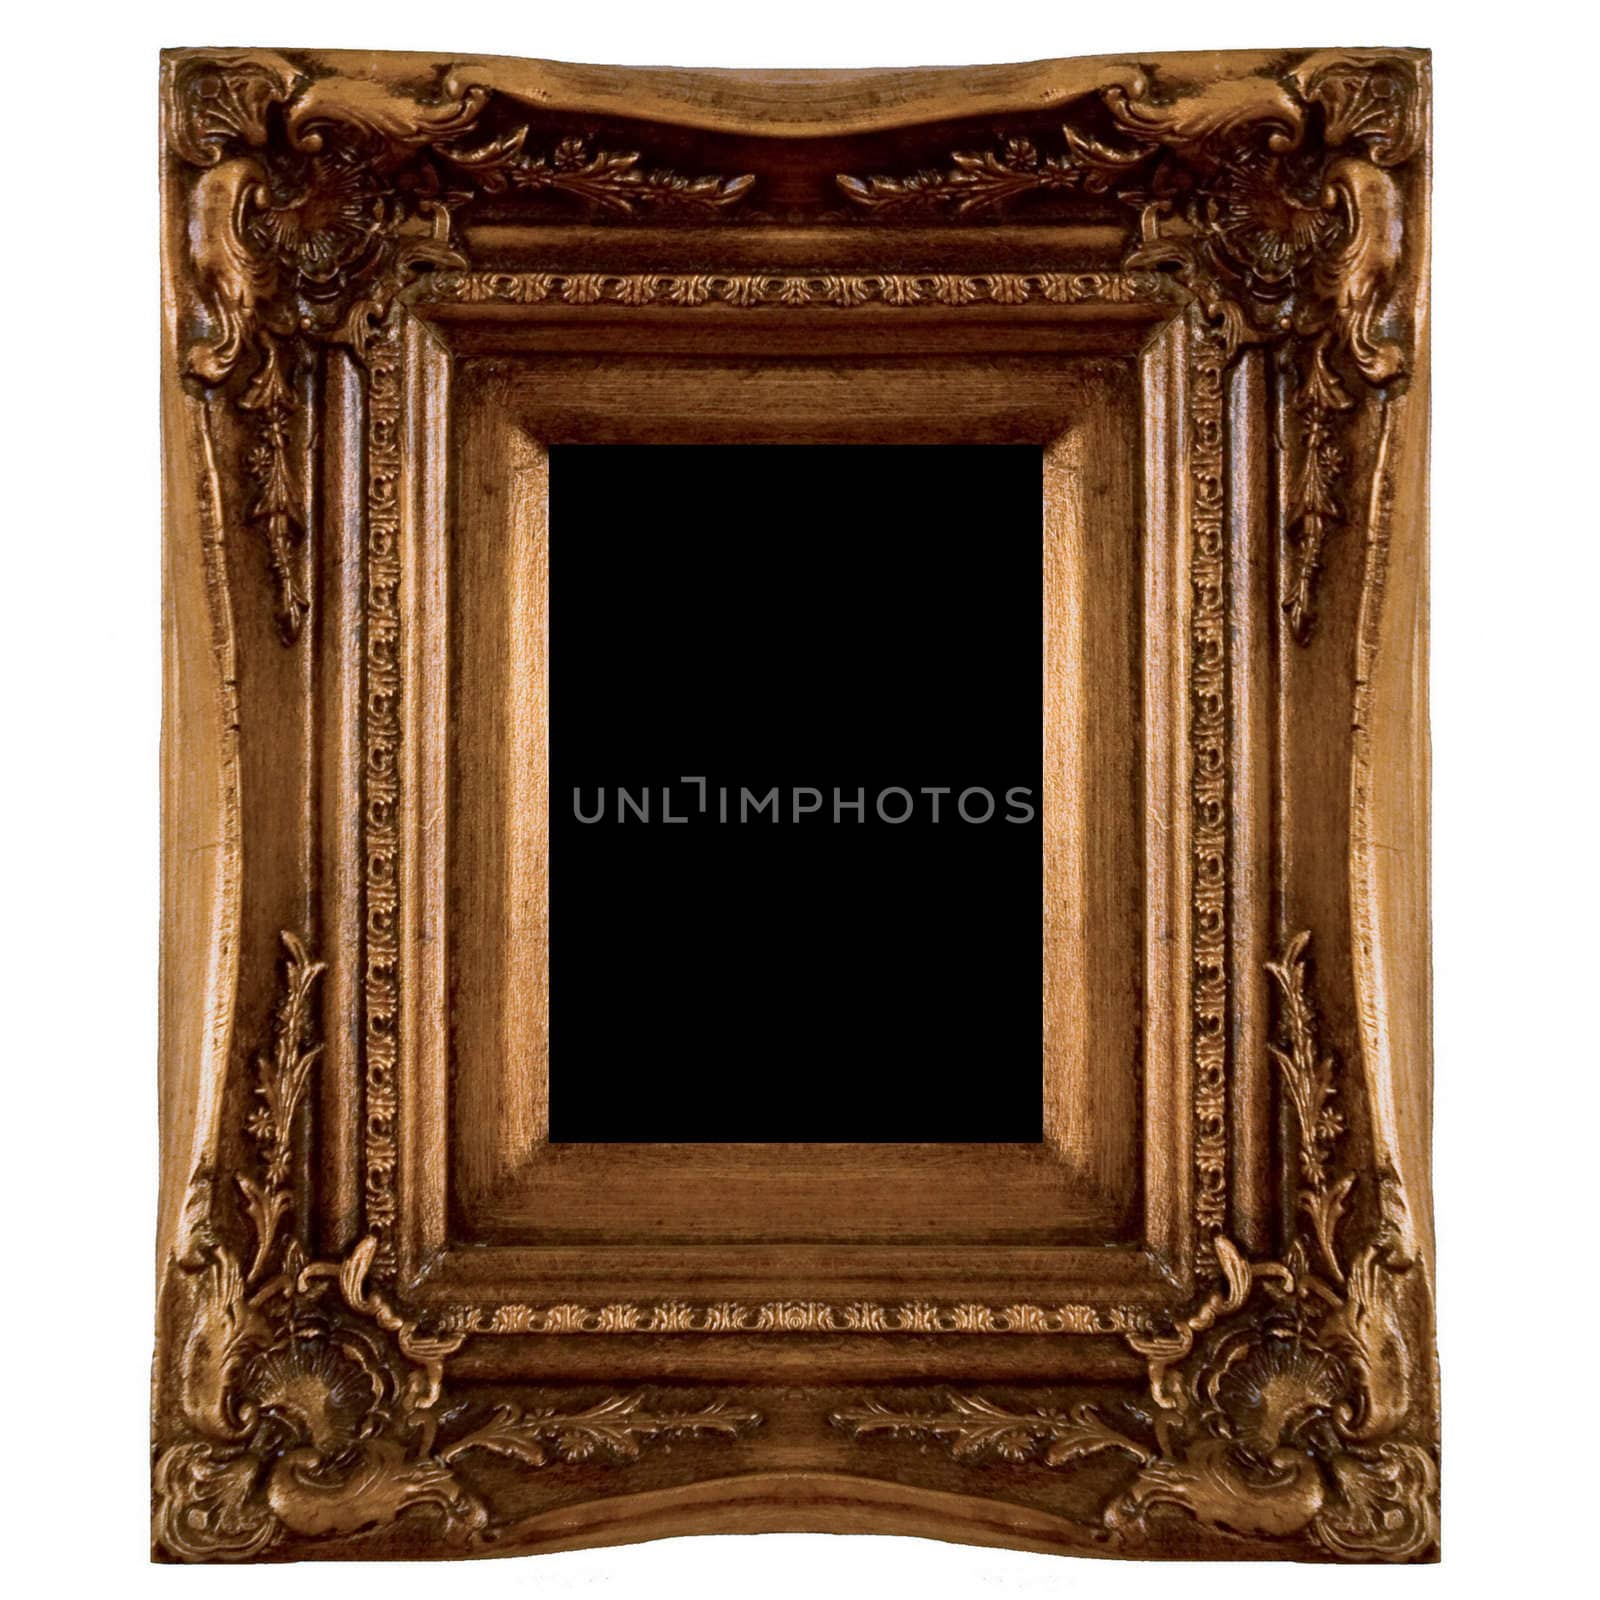 A large wooden frame - dark wood on white background